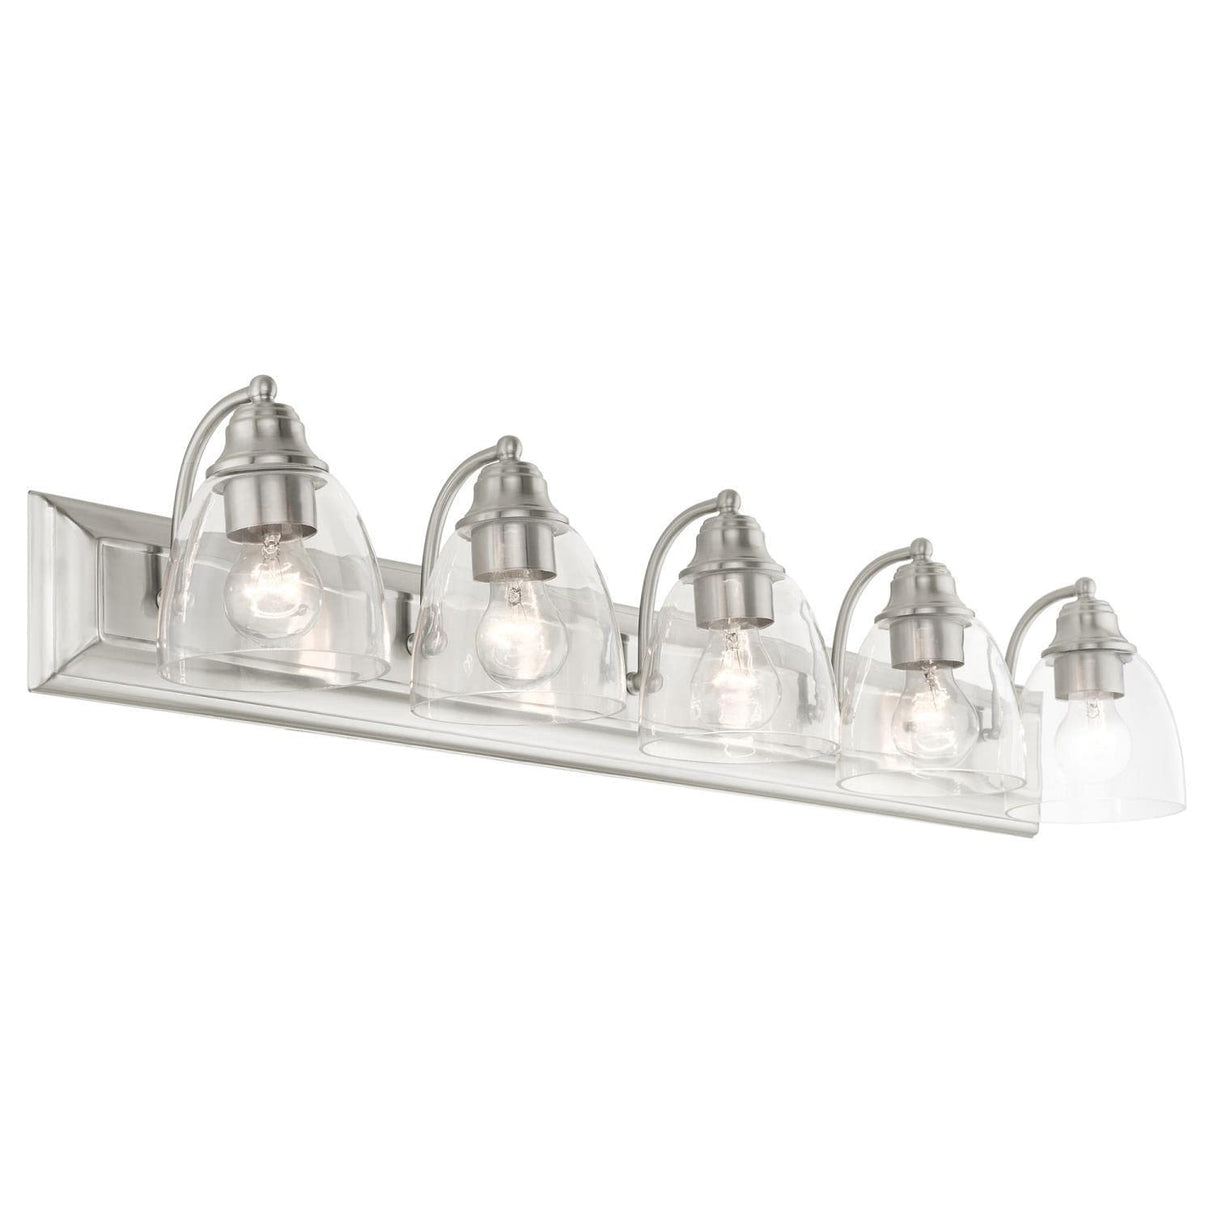 Livex Lighting 17075-91 Birmingham Collection 5-Light Bathroom Vanity Light with Clear Glass, Brushed Nickel